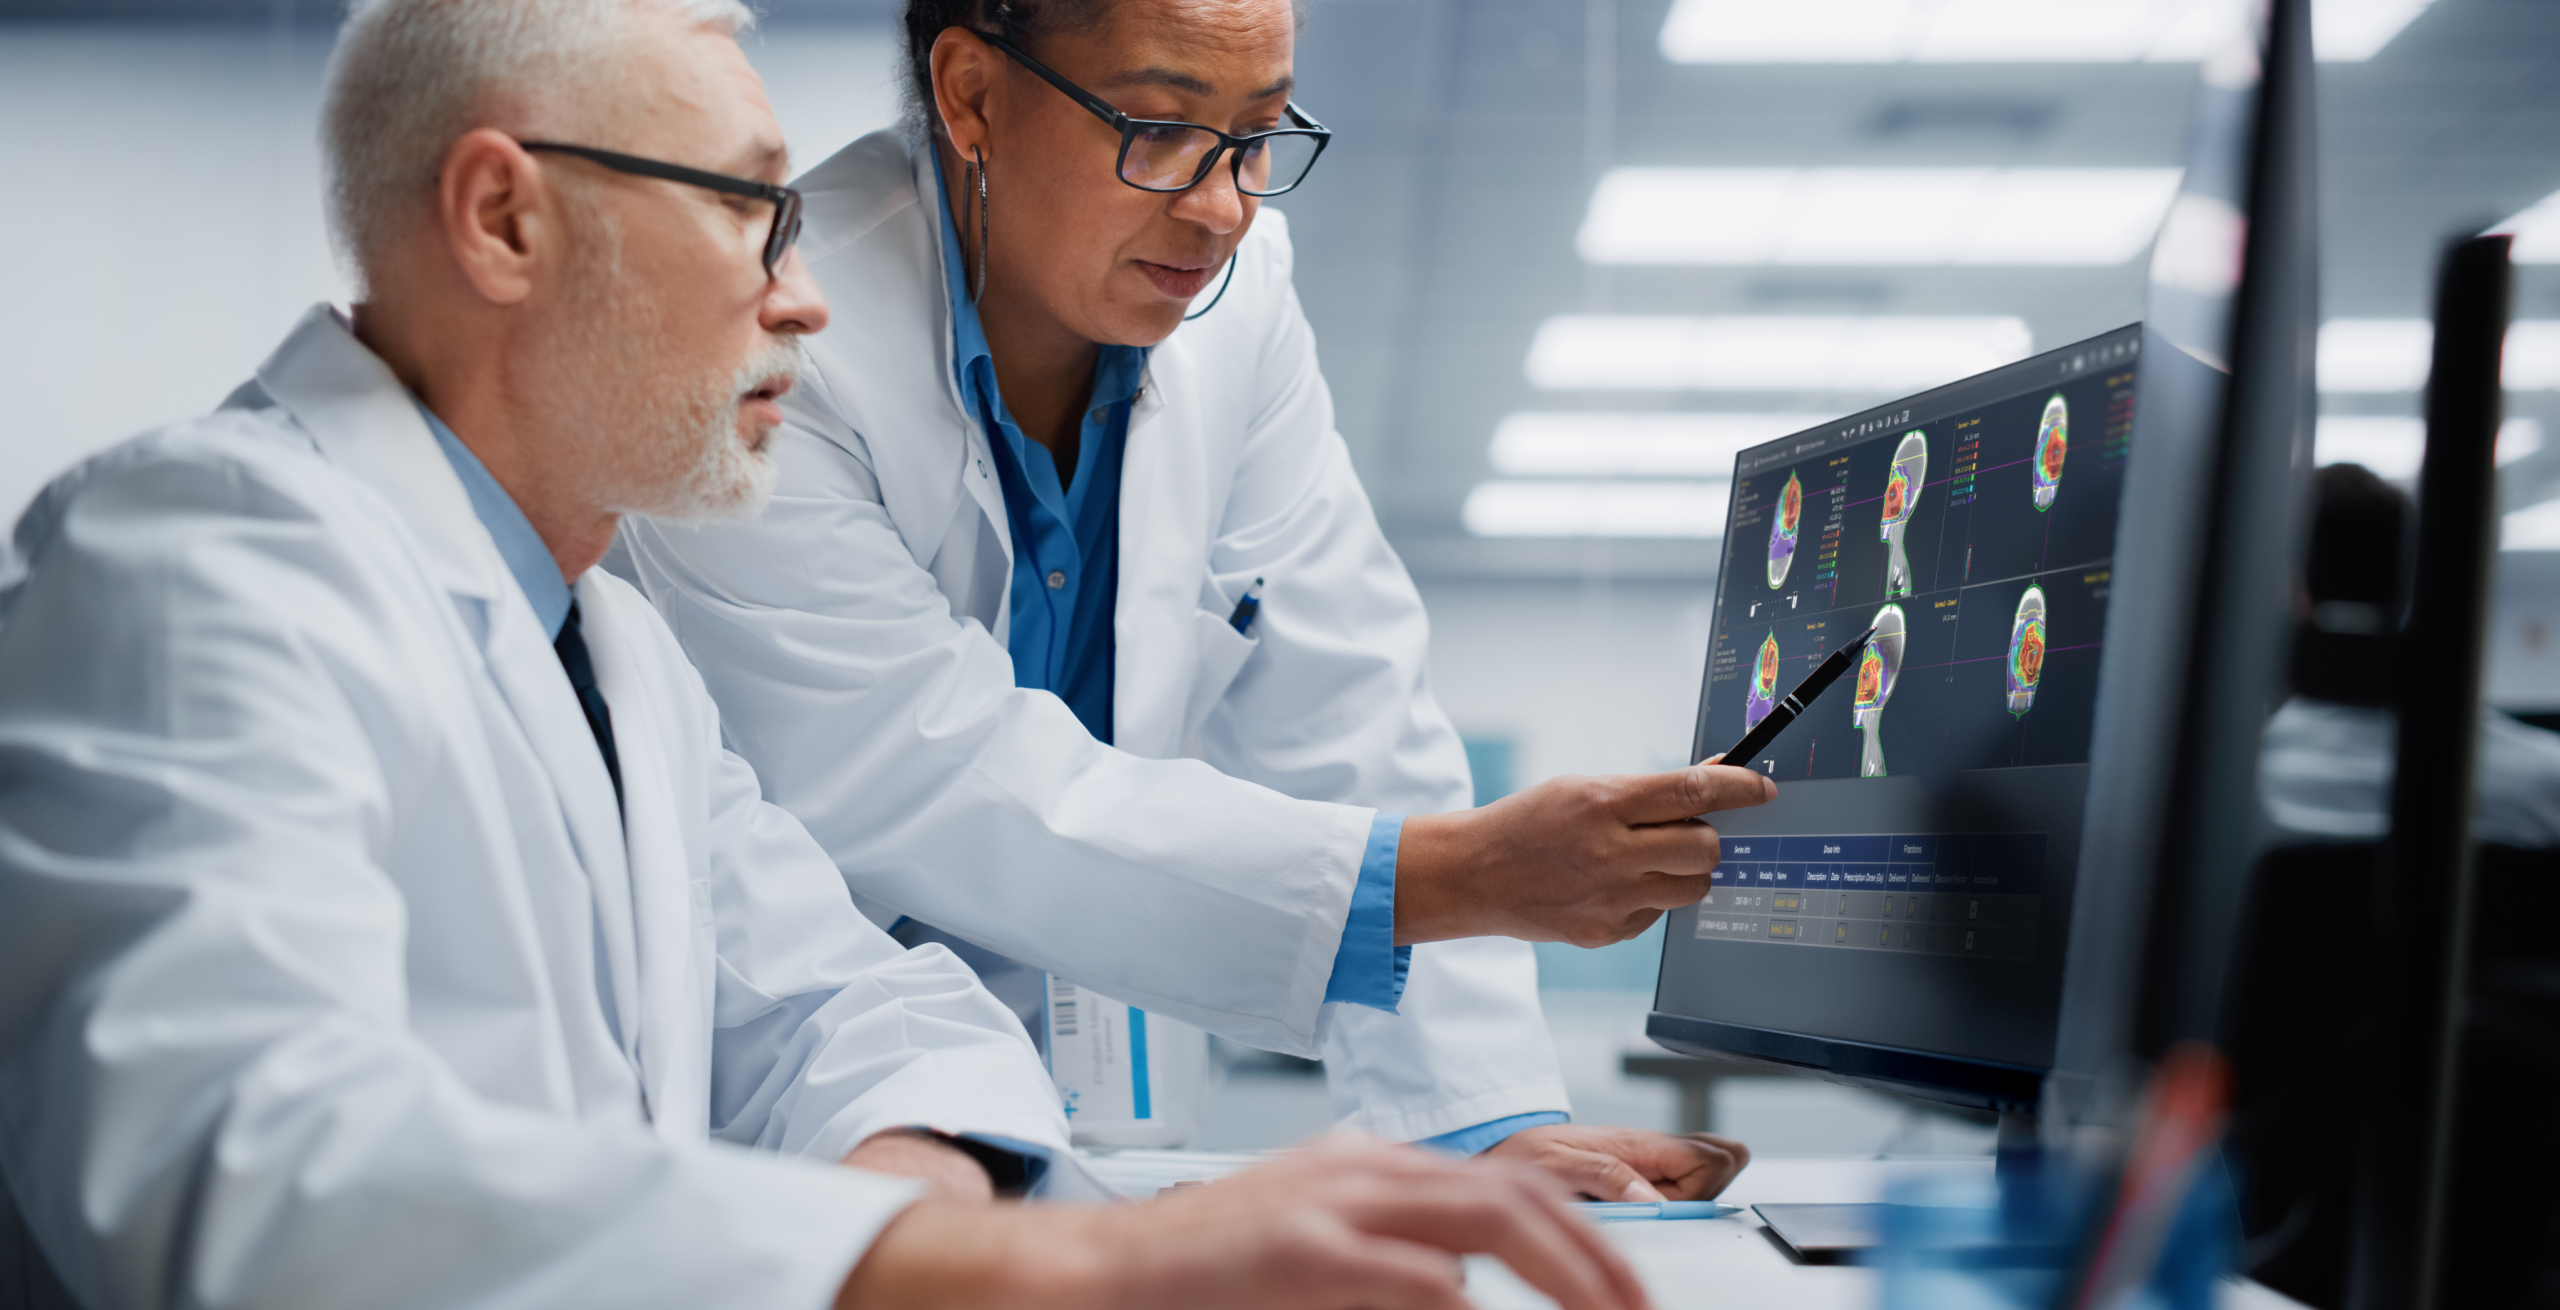 Two doctors looking at medical images on a computer monitor